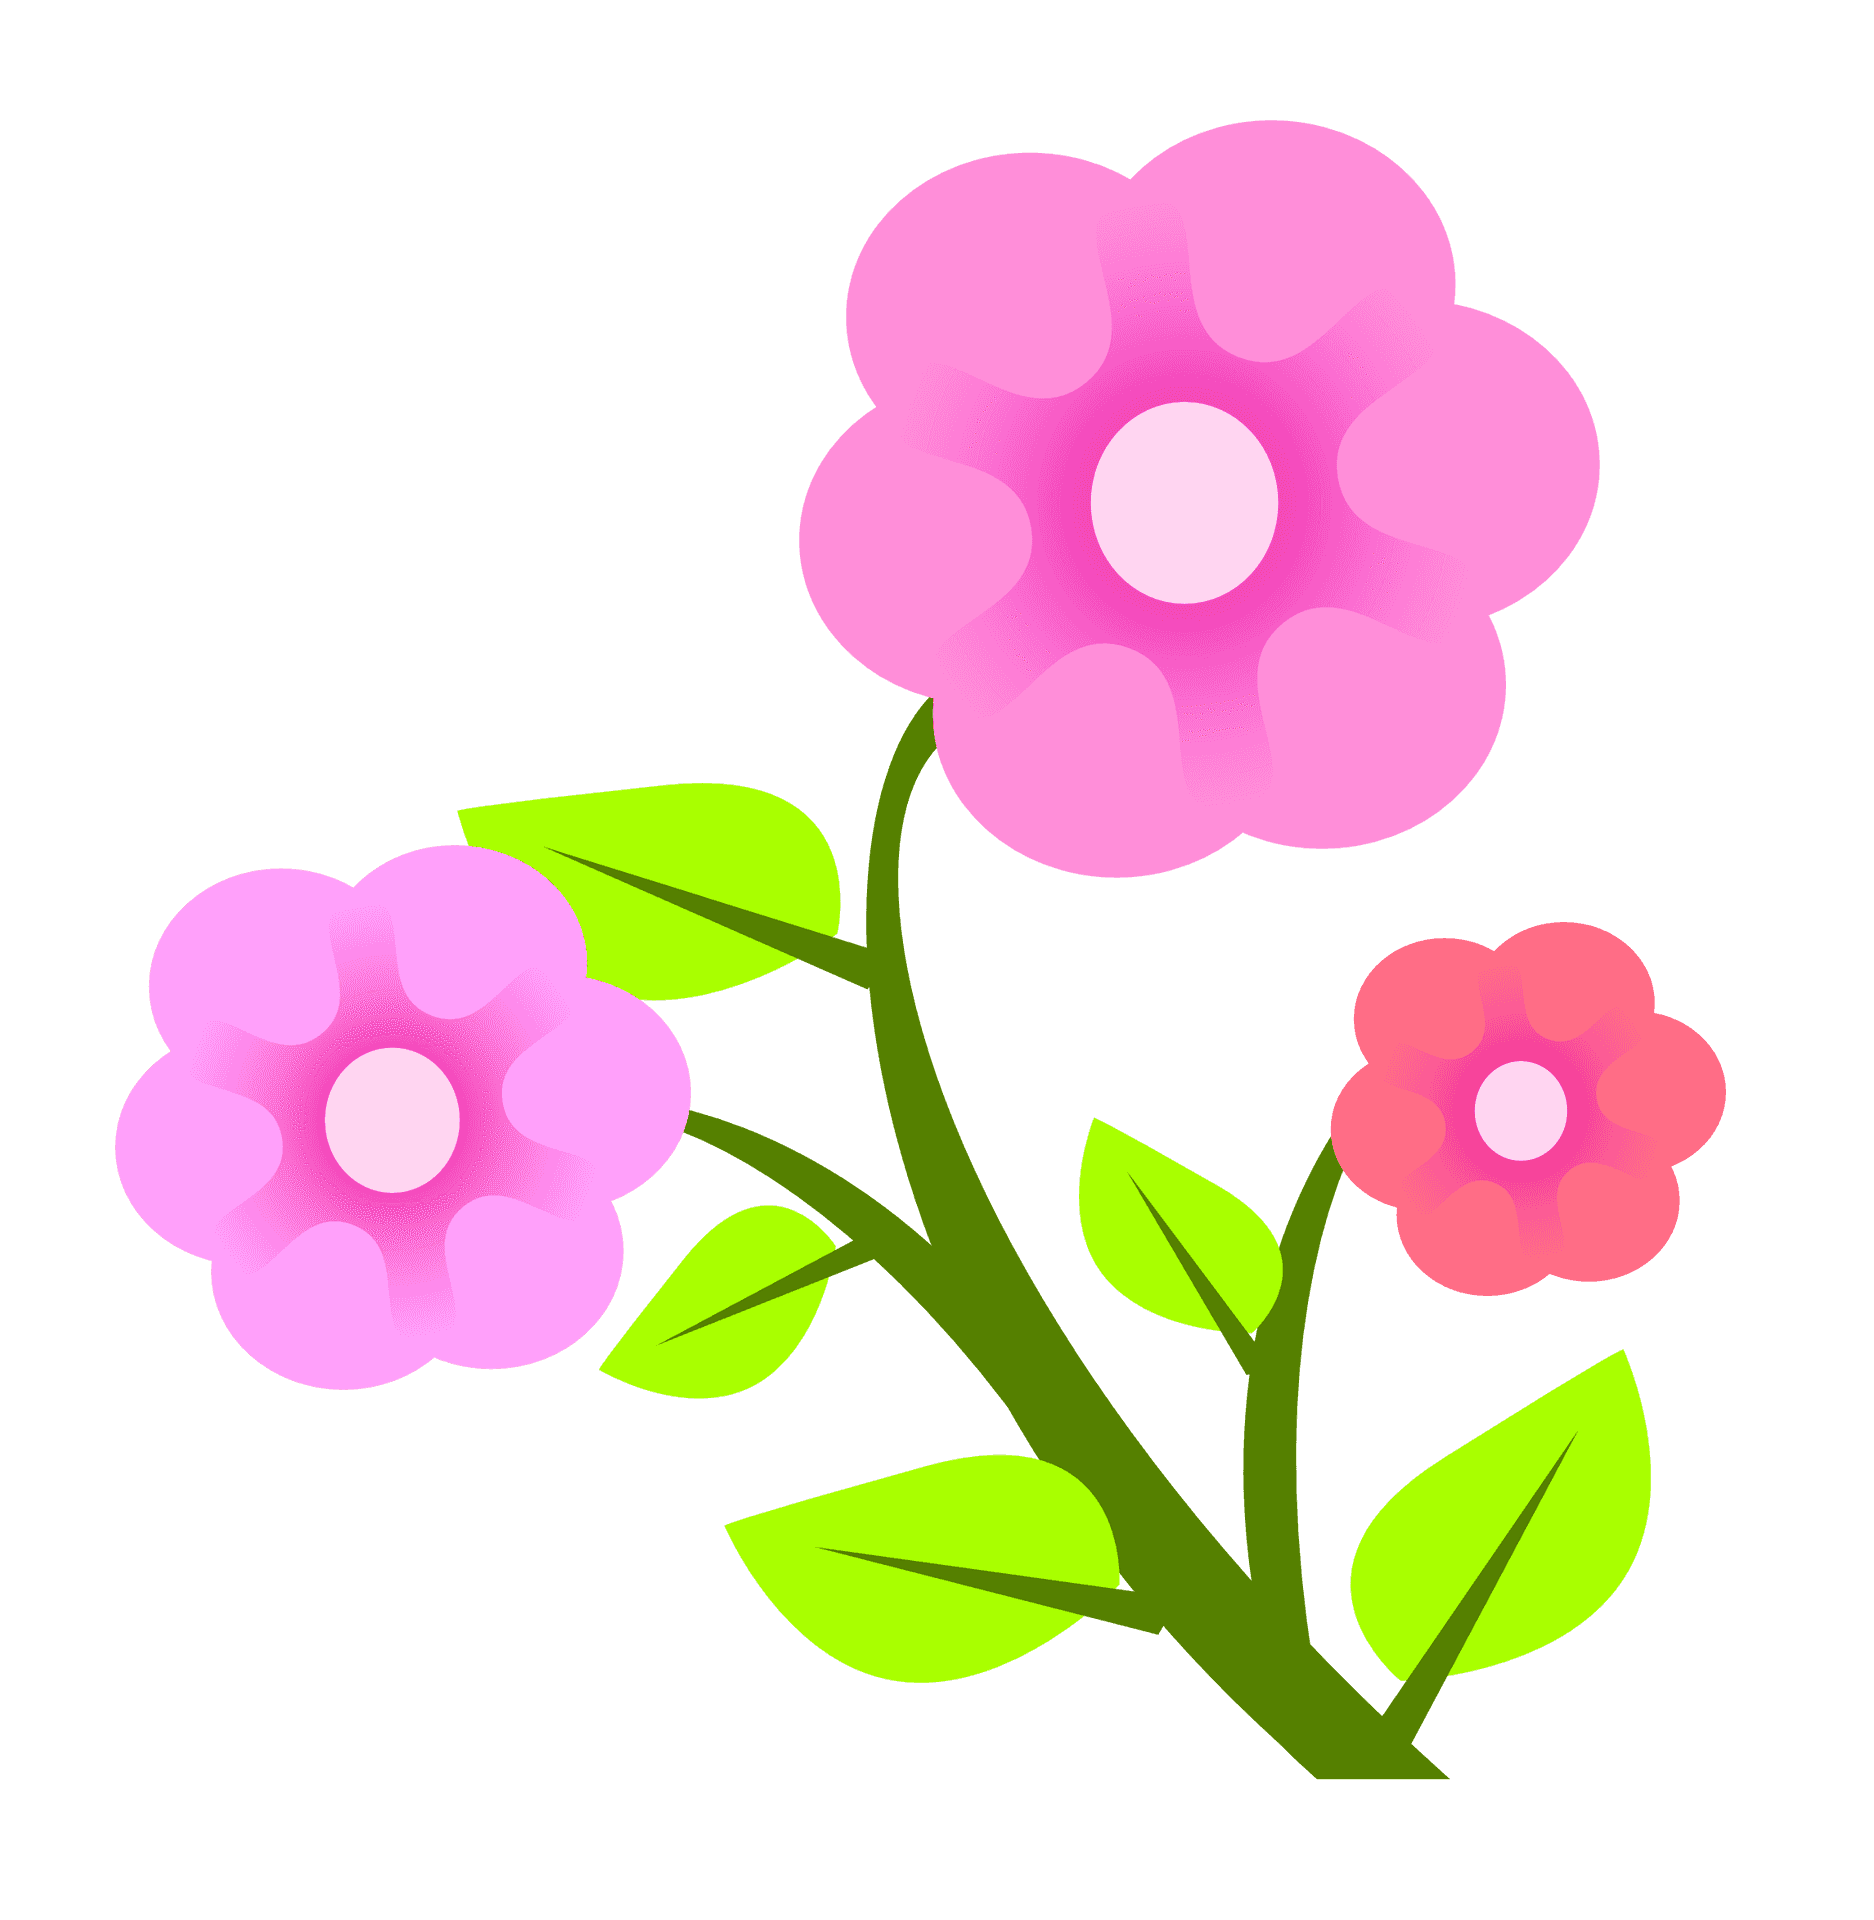 Stylized Pink Flowers Illustration PNG image